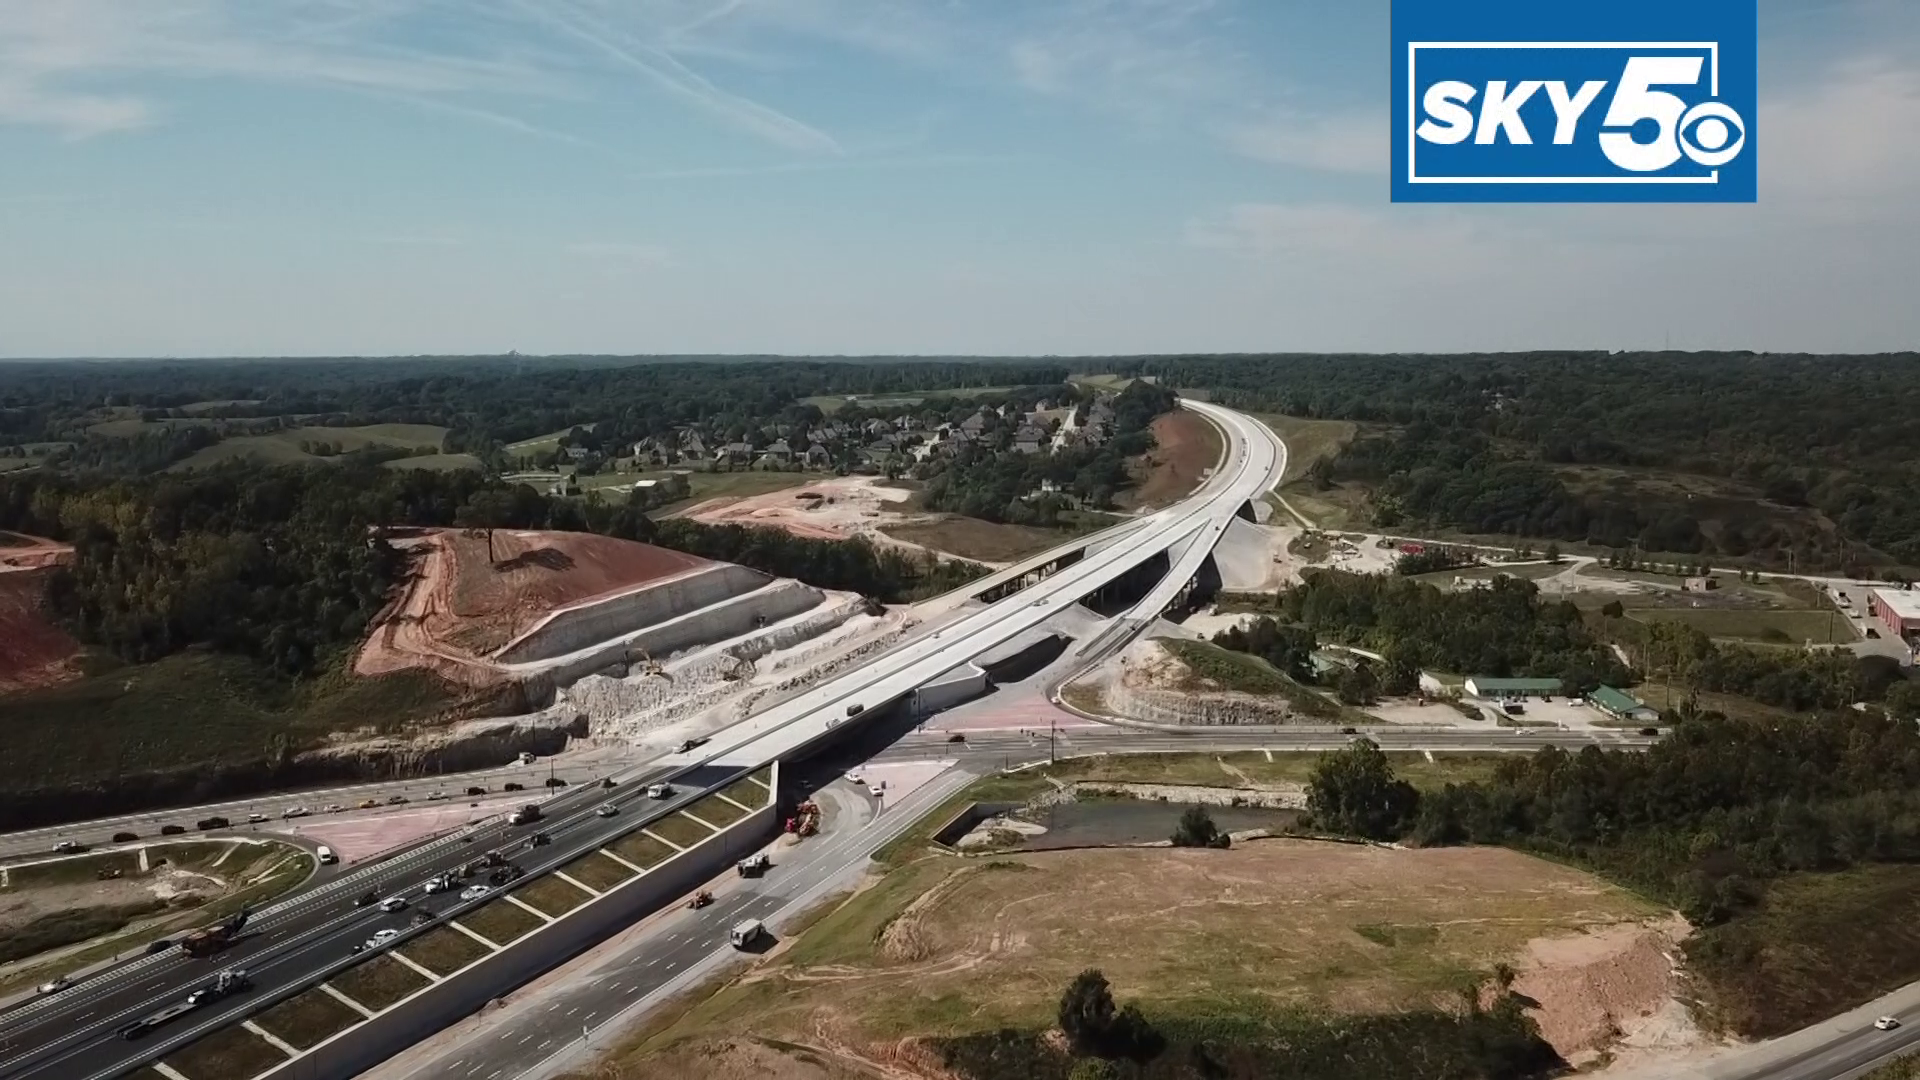 5NEWS Anchor Daren Bobb spoke with the NWA Council president to discuss what impact the soon-to-open Bella Vista Bypass will have on the region.